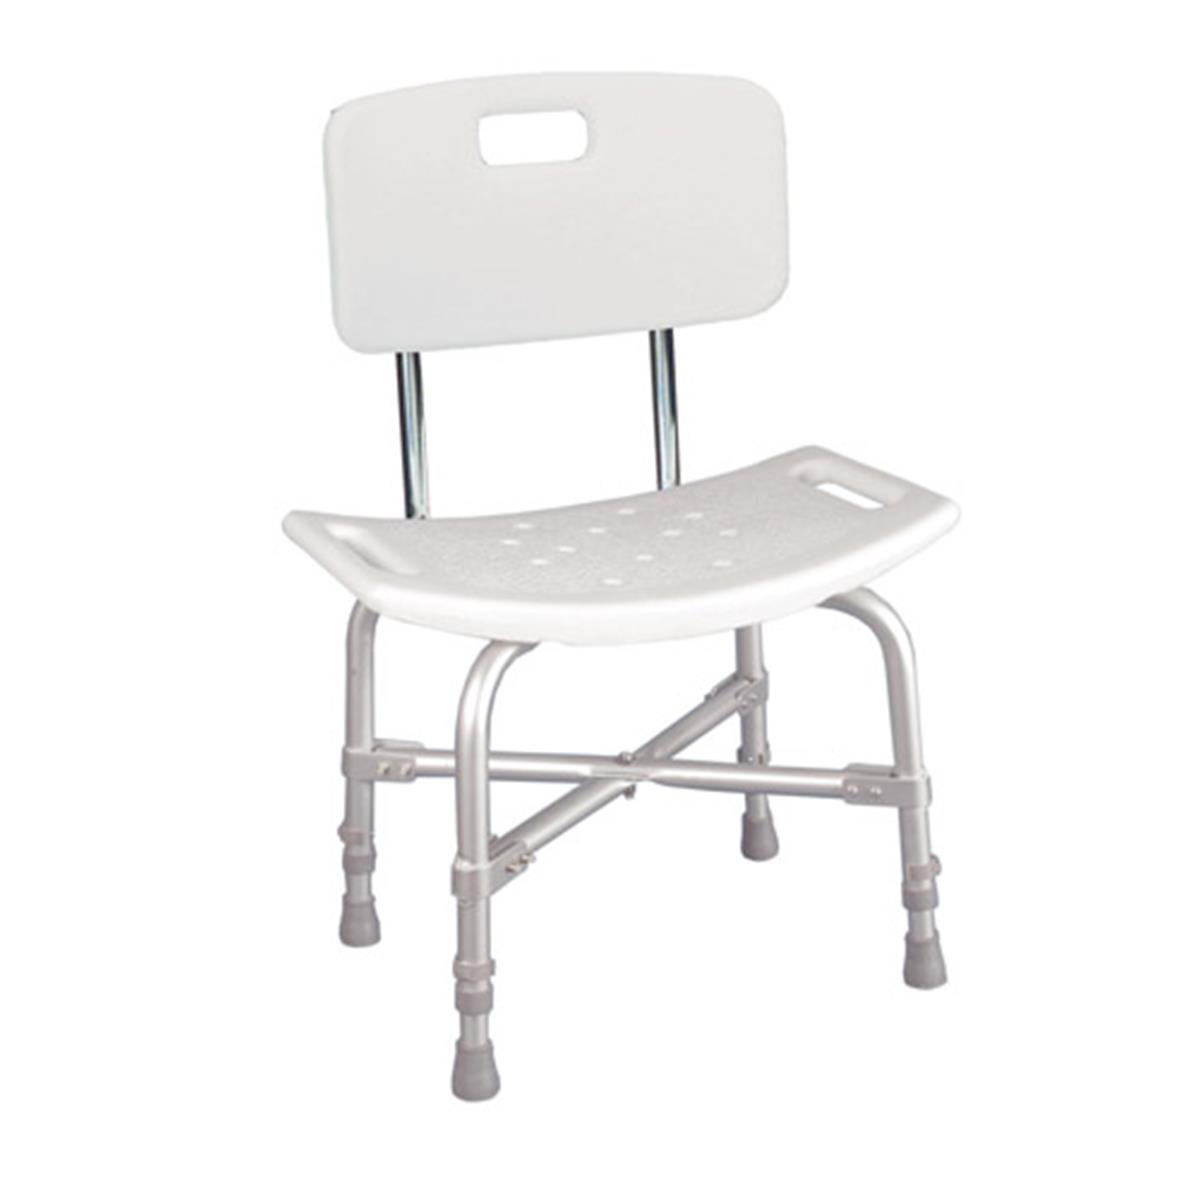 Picture of Drive DeVilbiss Healthcare 1154F Back Bariatric Heavy Duty Bath Bench